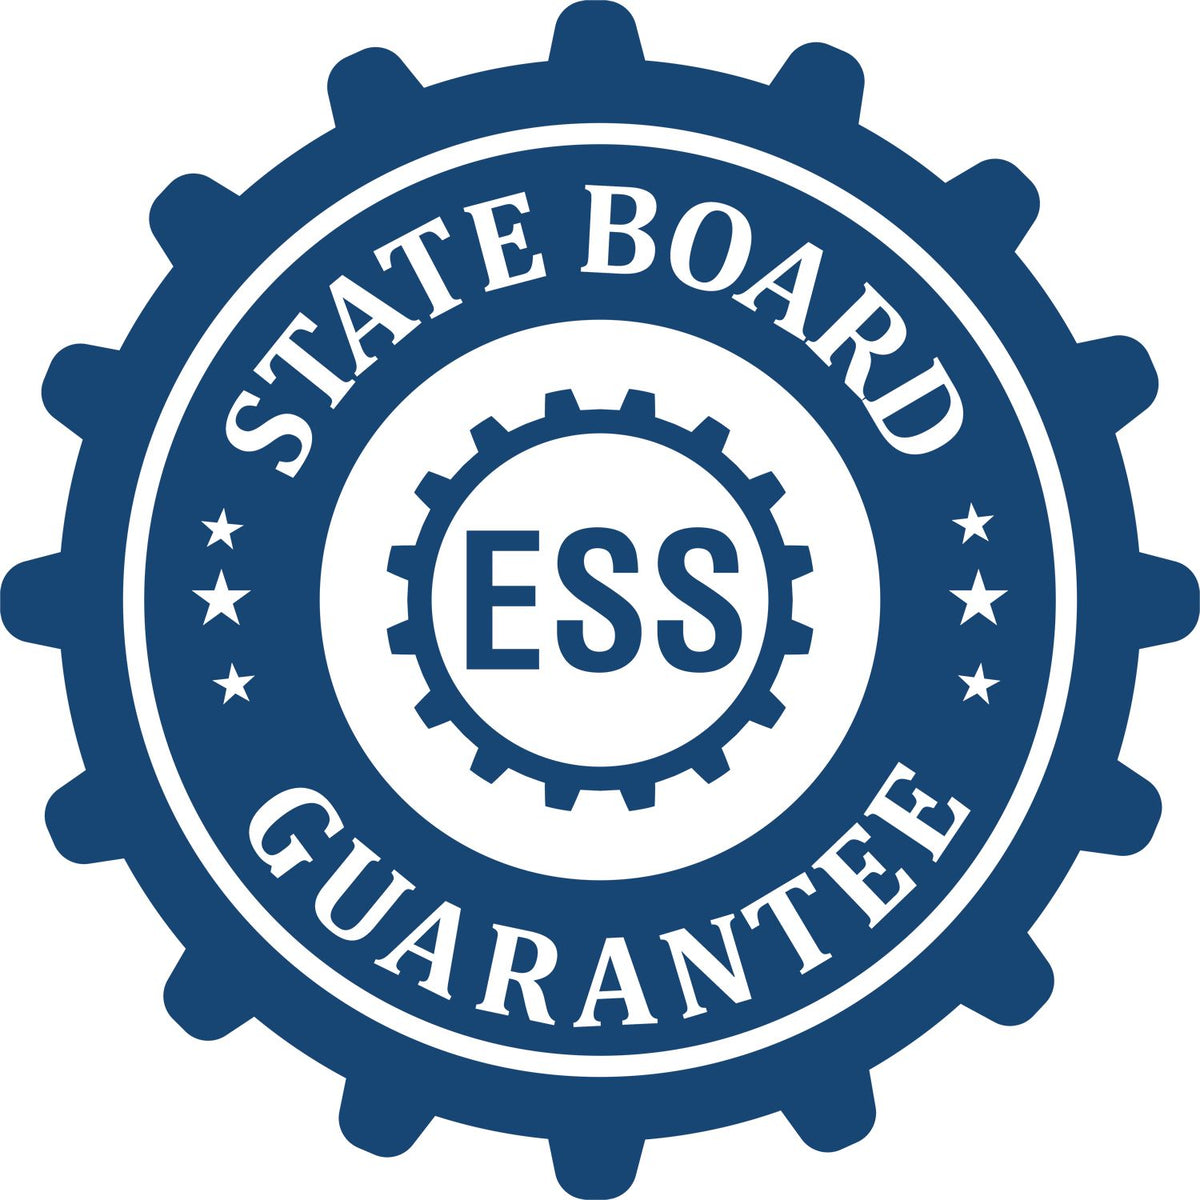 An emblem in a gear shape illustrating a state board guarantee for the Tennessee Engineer Desk Seal product.